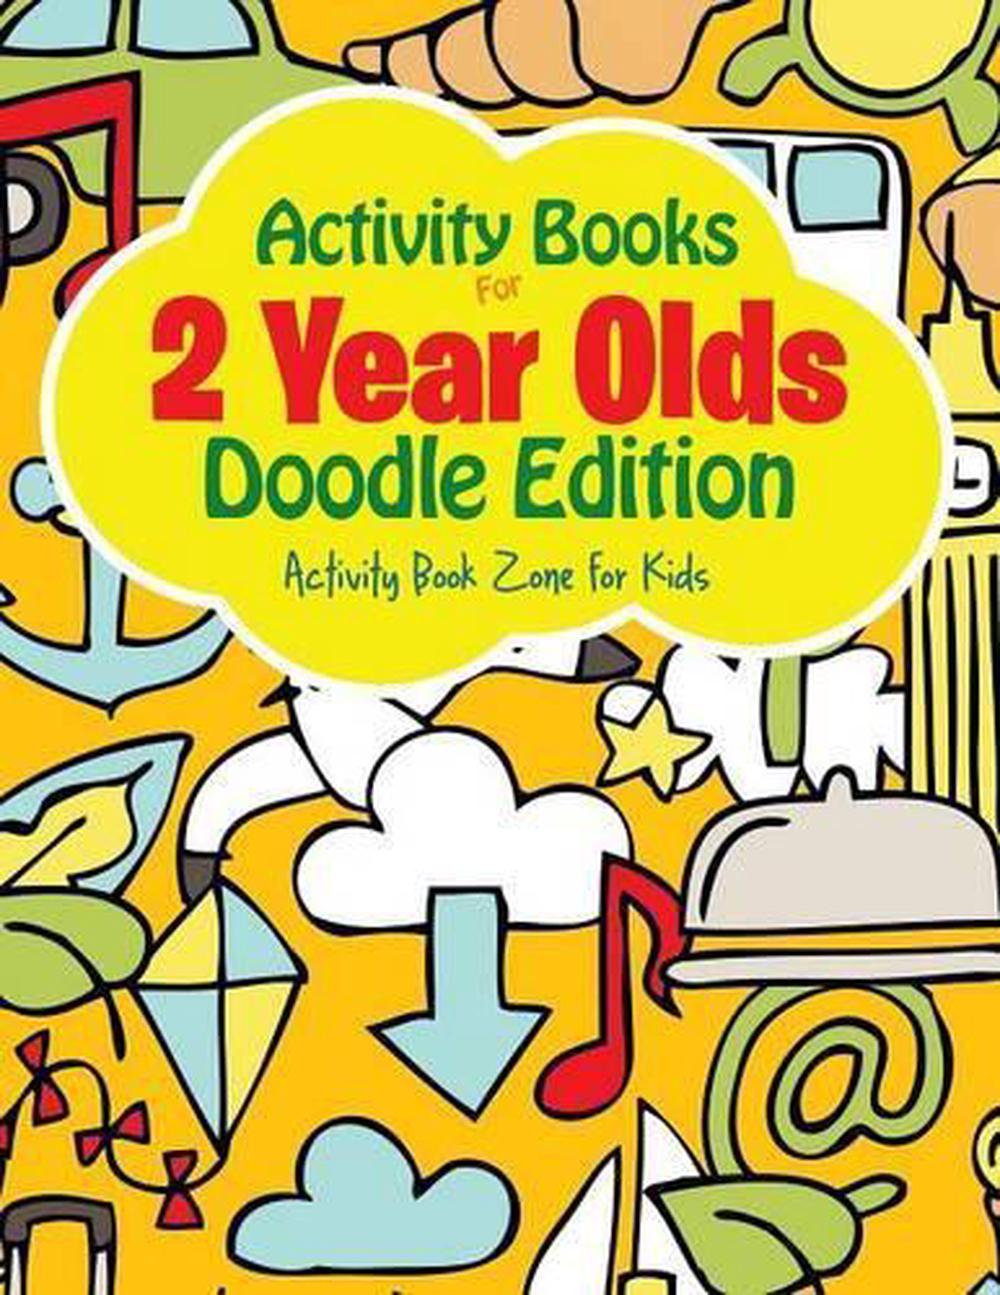 Activity Books for 2 Year Olds Doodle Edition by Activity Book Zone For